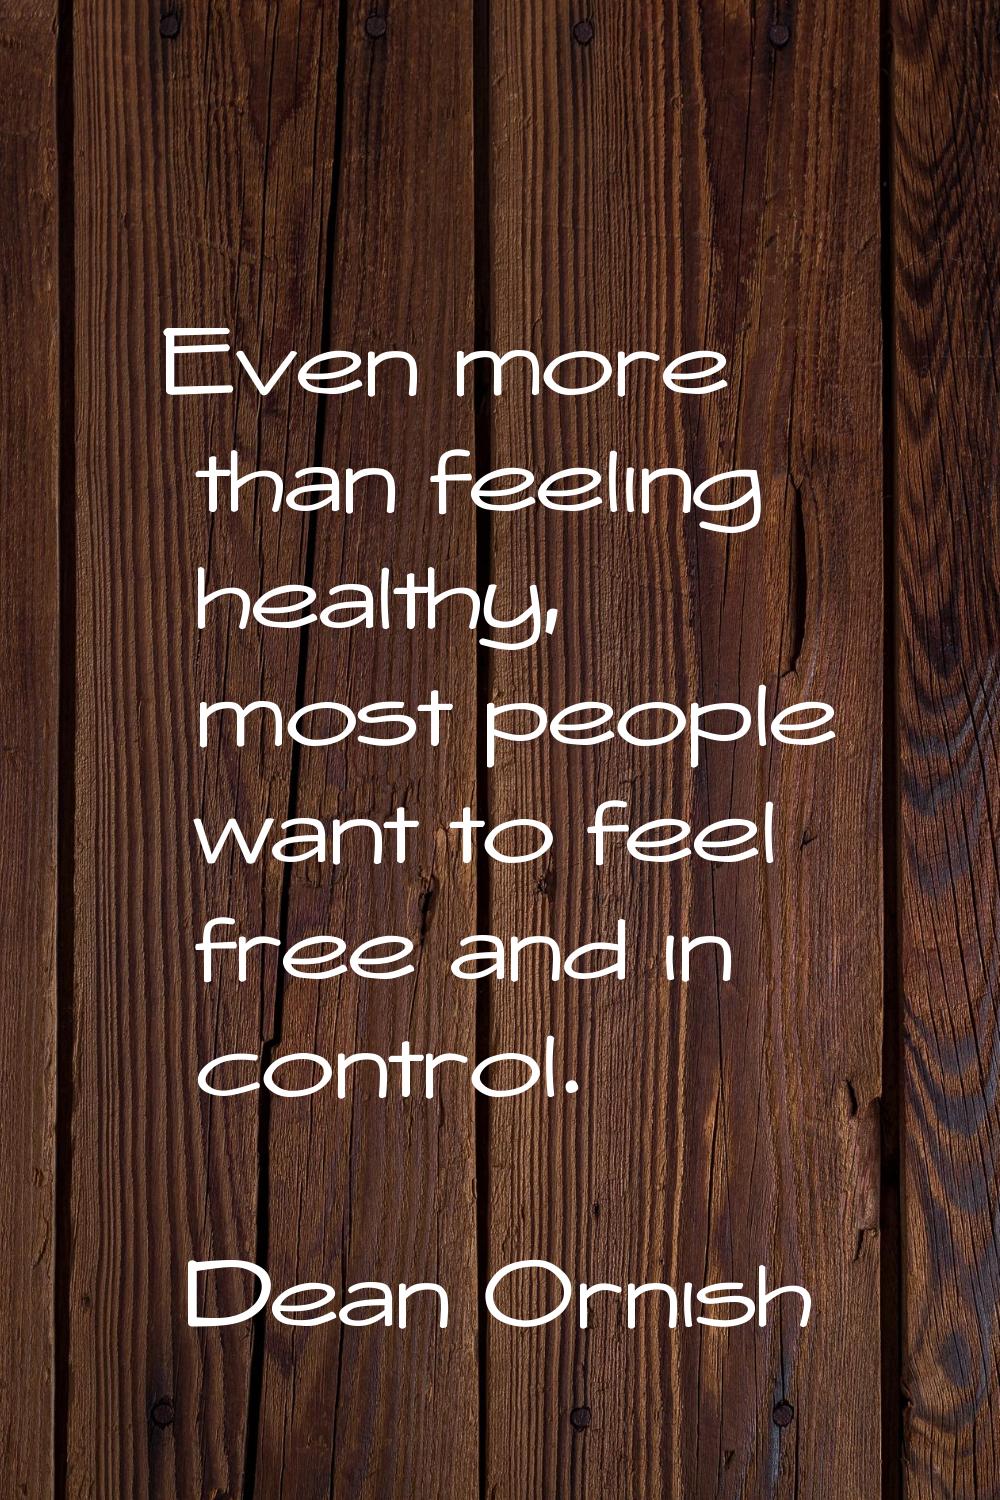 Even more than feeling healthy, most people want to feel free and in control.